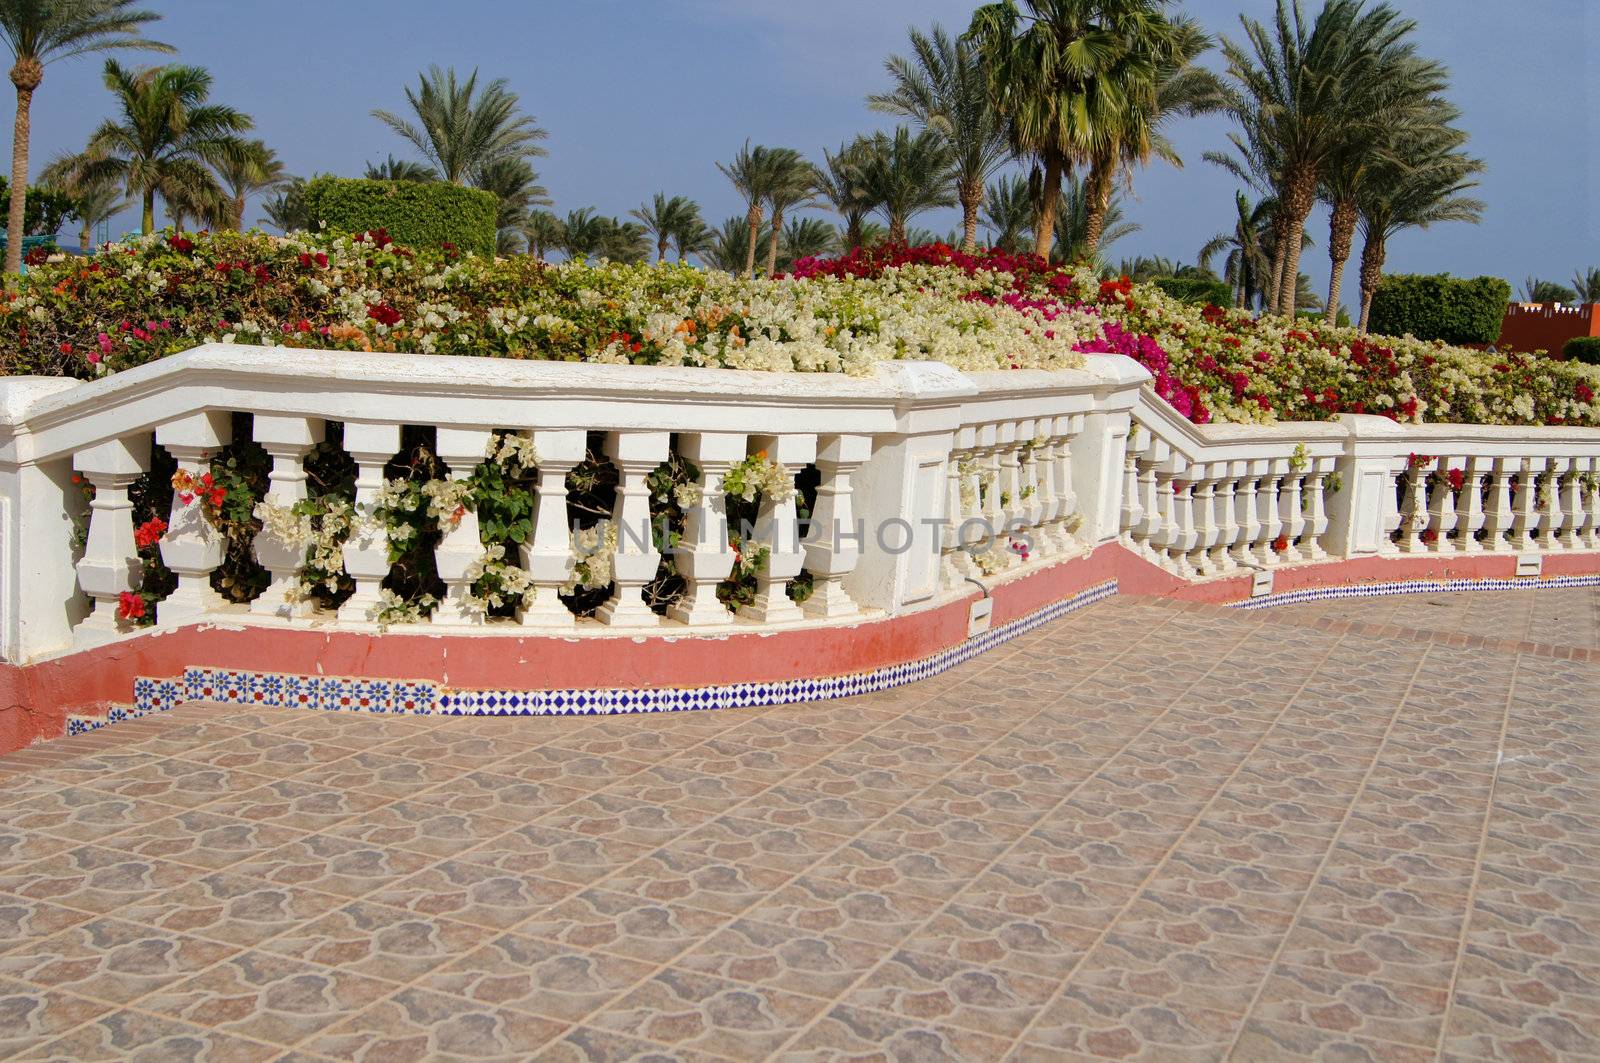 Arabic architecture: walkway and bougainvillea flowers            